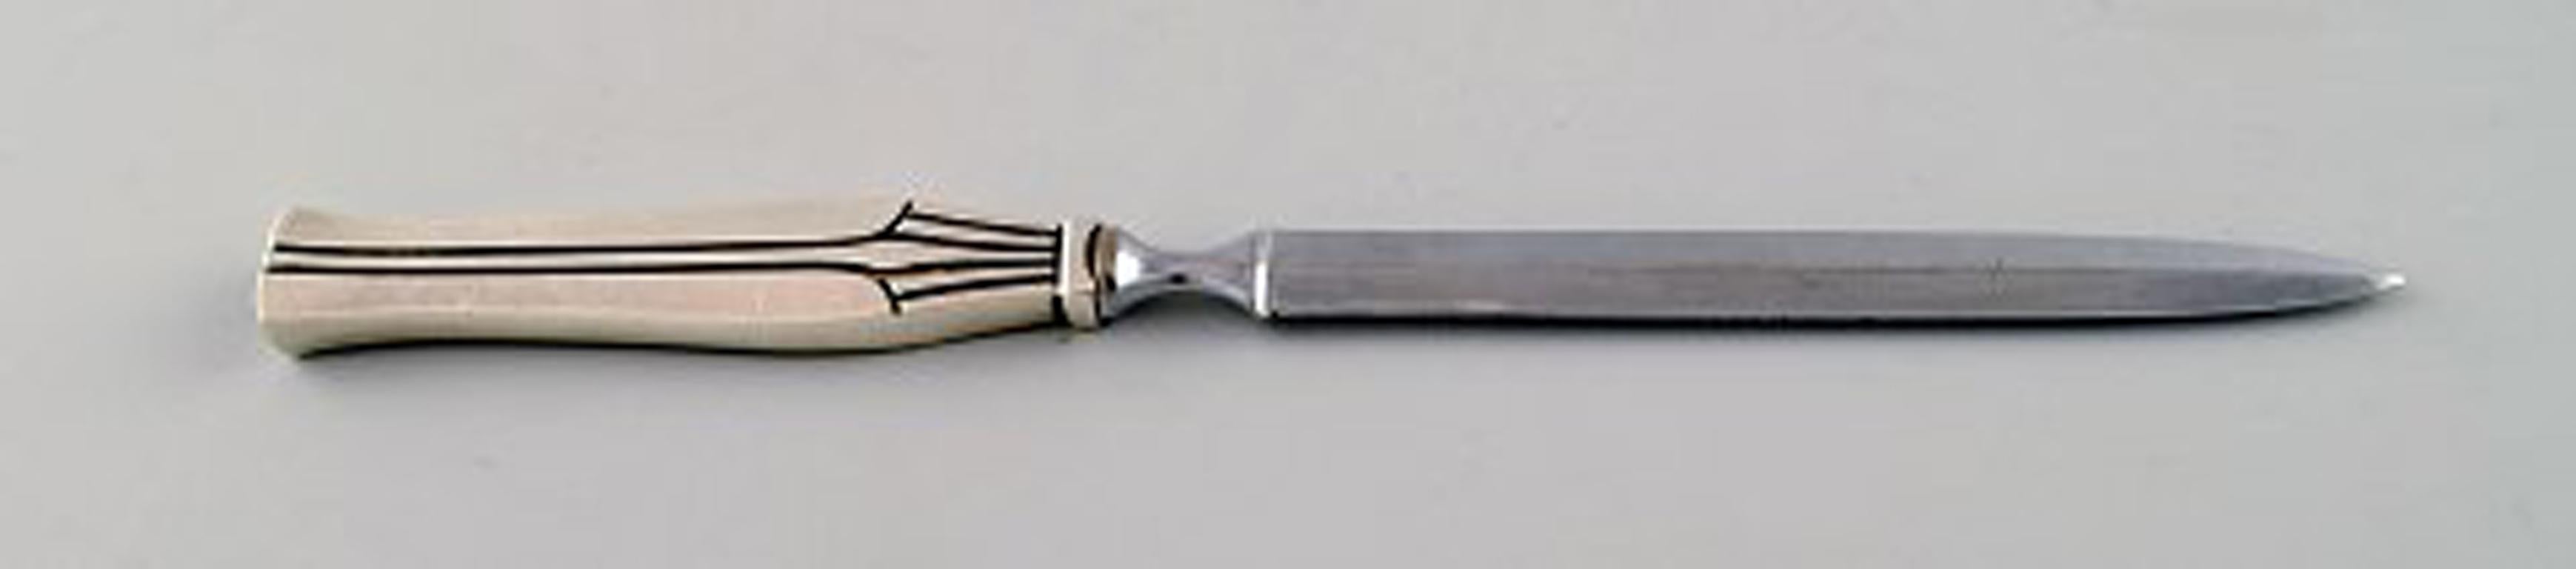 Danish silver (0.830), Art Deco letter knife.
Measures 22 cm.
In very good condition.
Stamped.